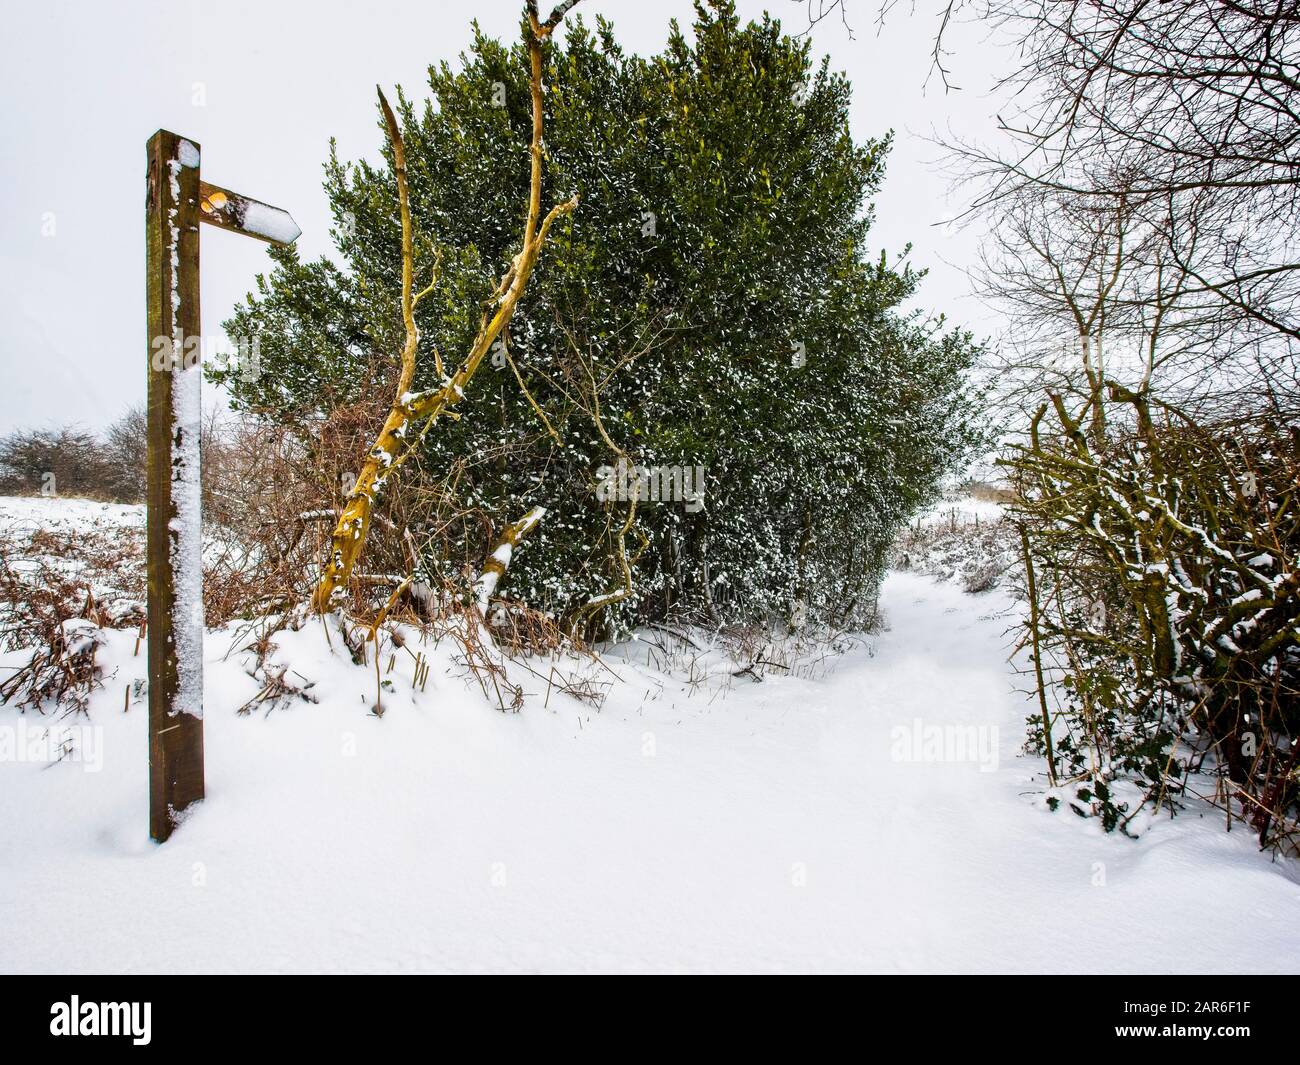 Bad Weather Conditions In The Countryside Stock Photo